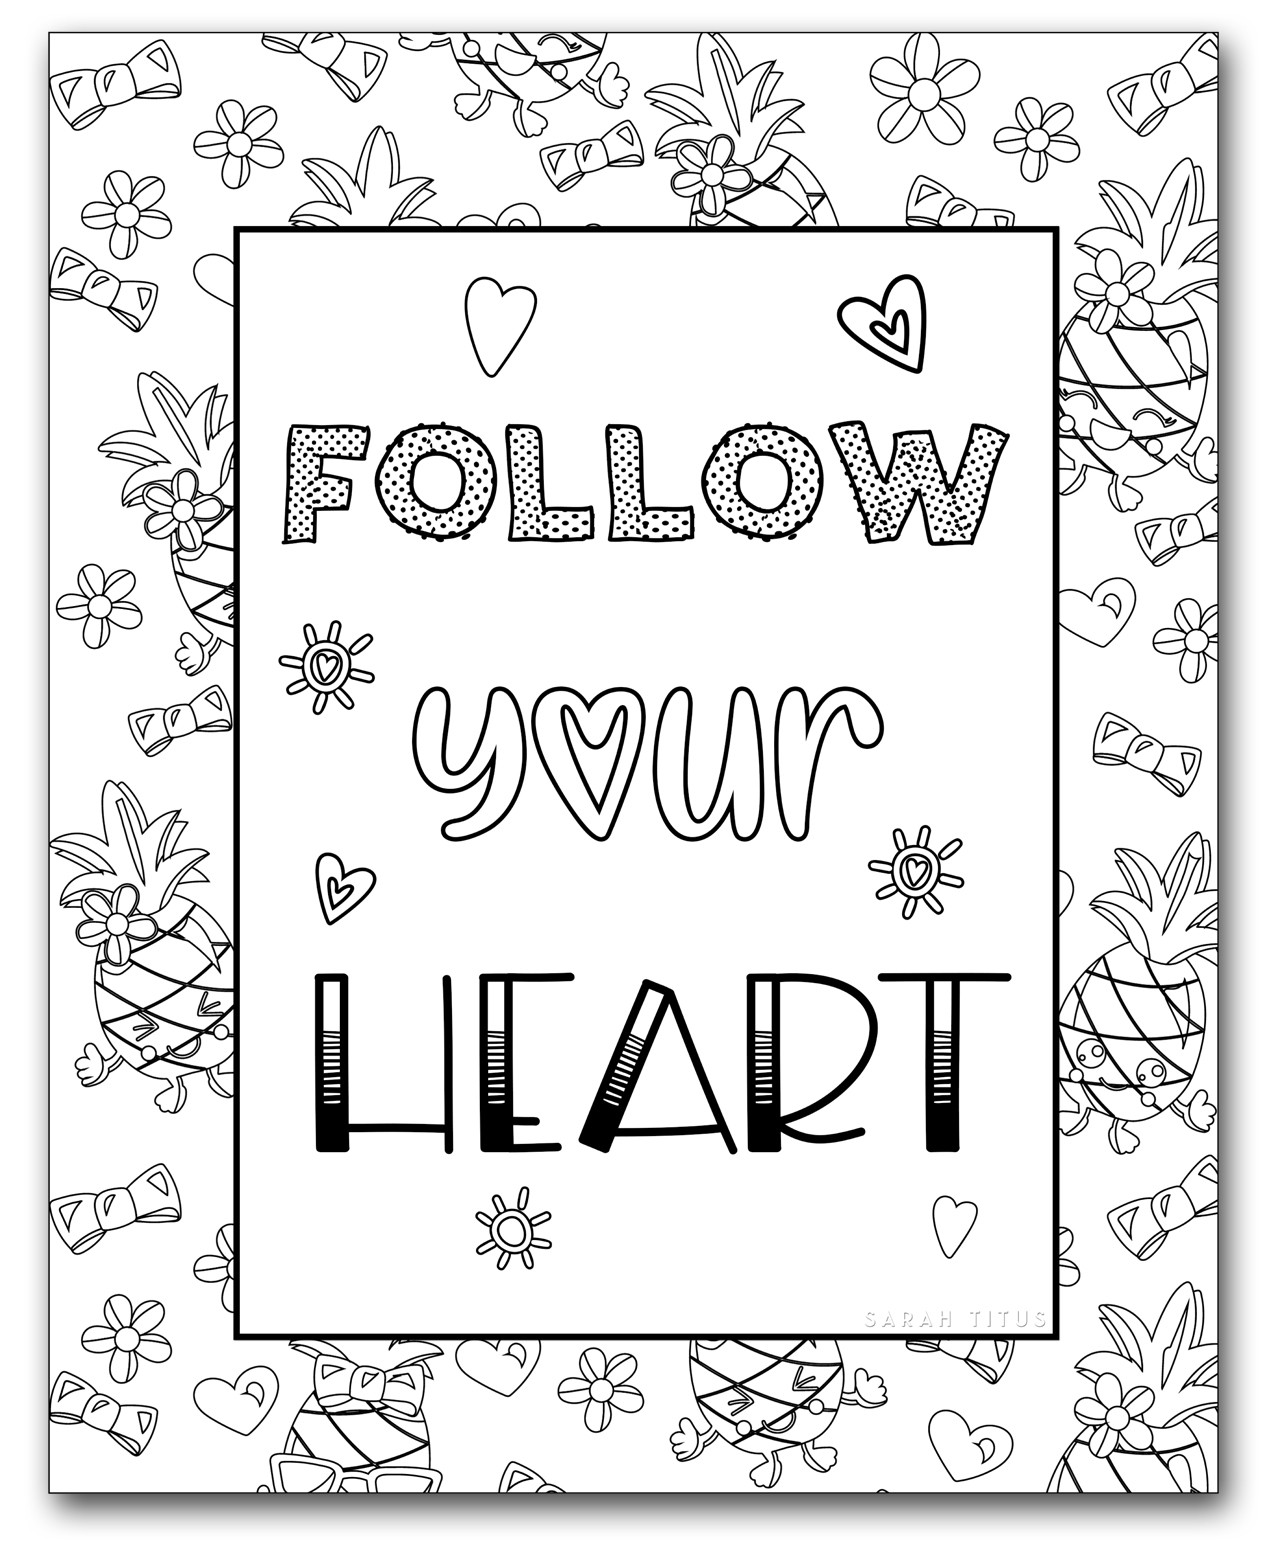 Printable Coloring Pages For Girls
 Printable Coloring Pages for Girls Sarah Titus